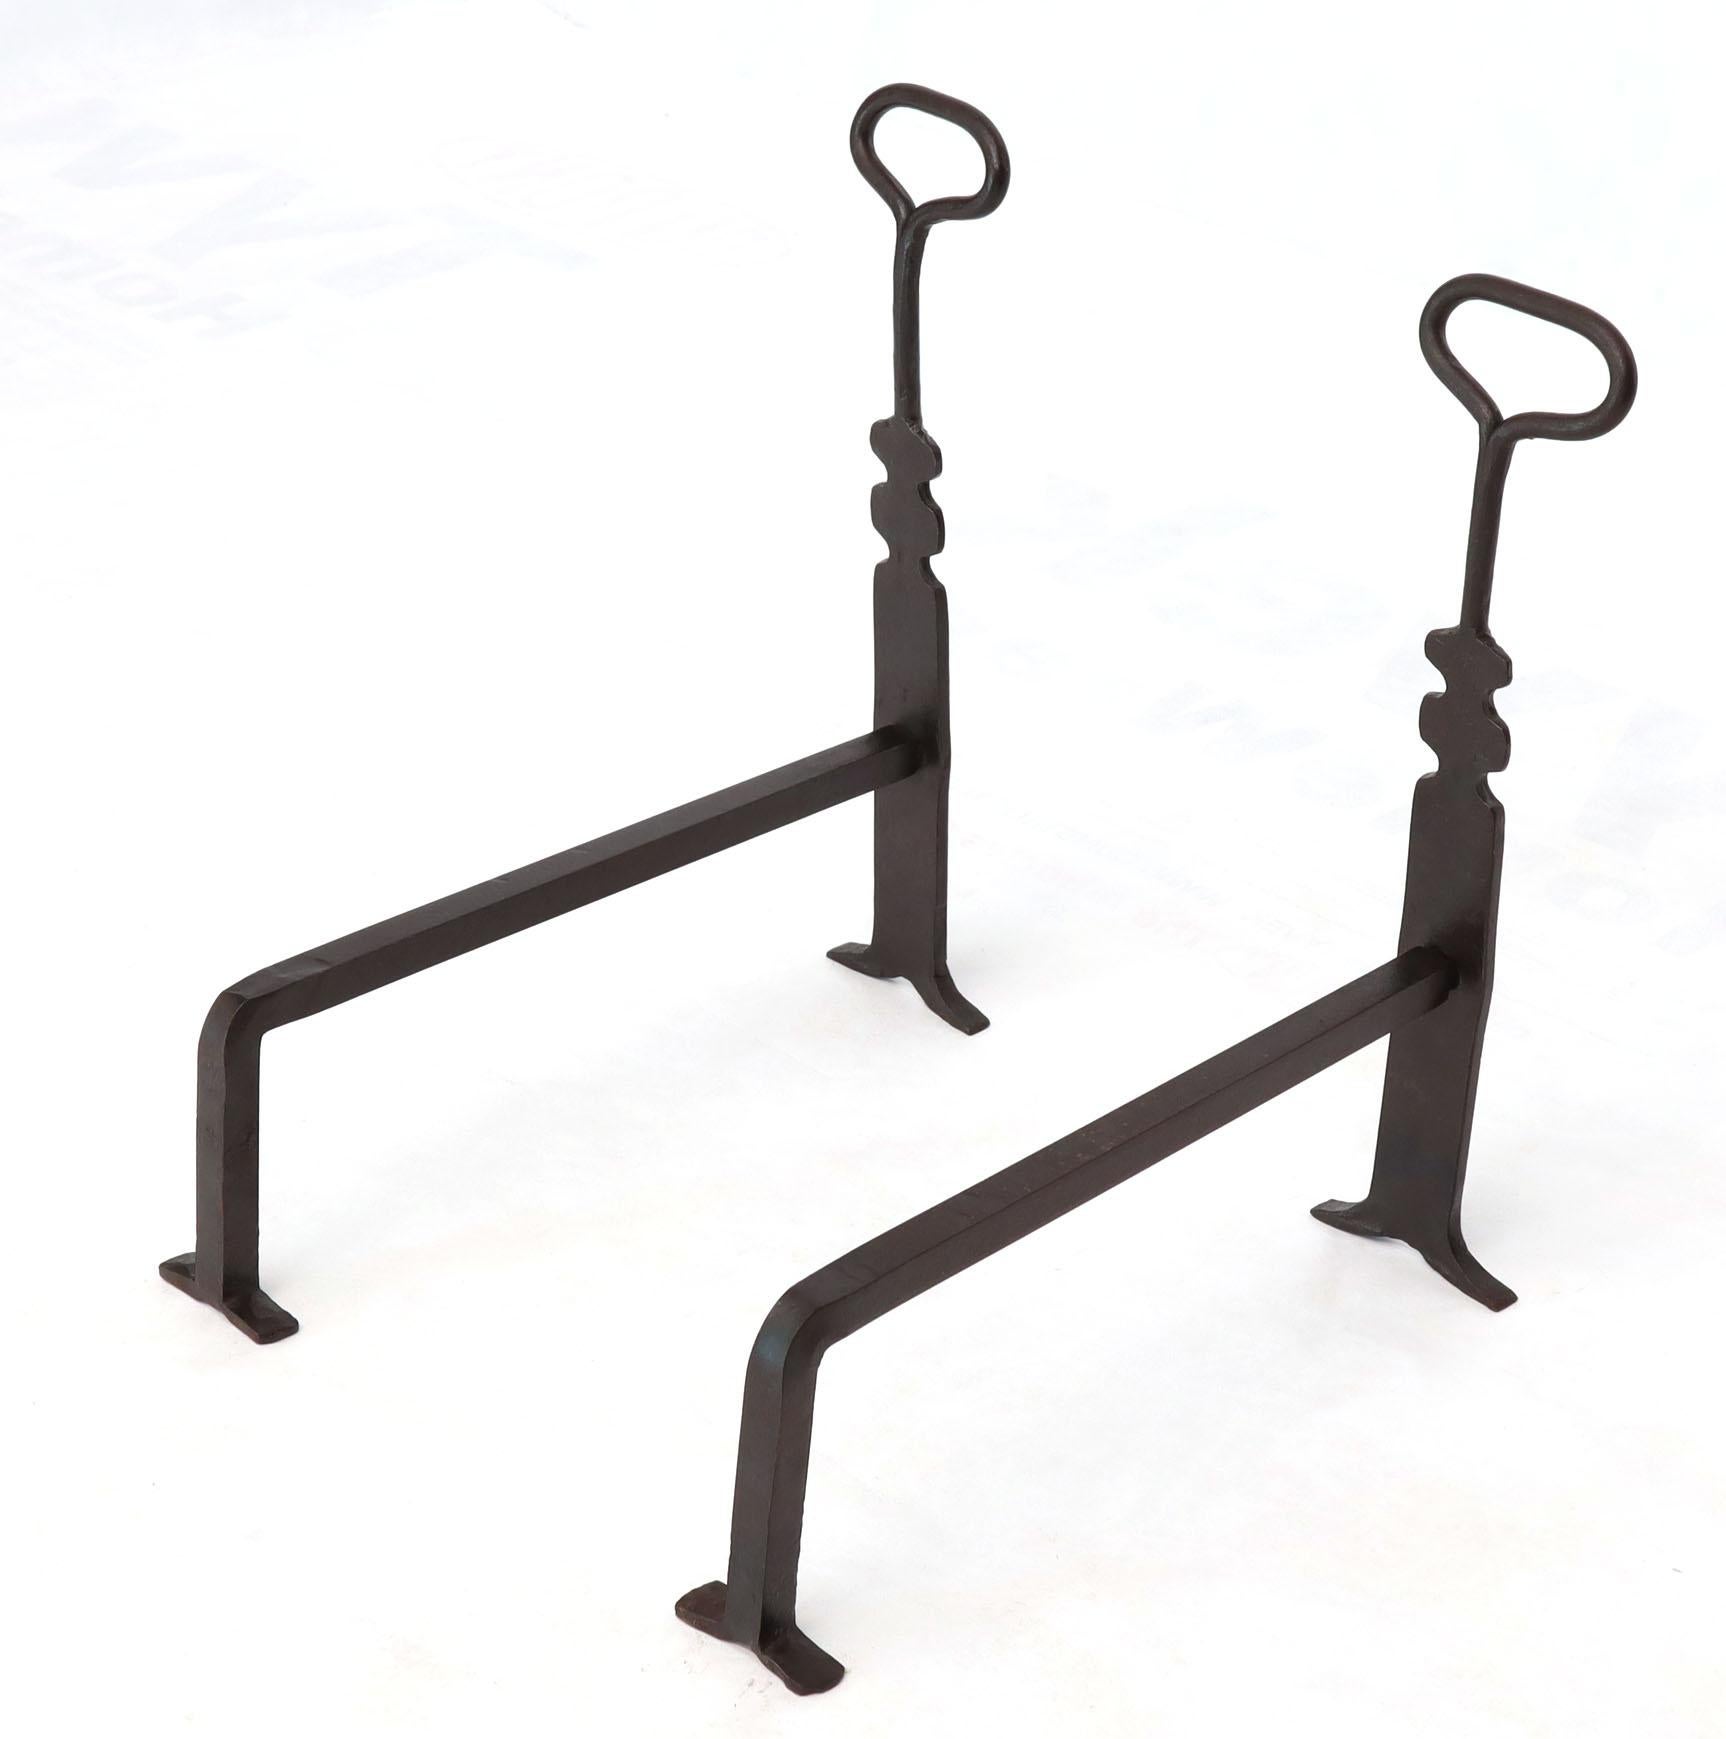 Pair of Mid-Century Modern style wrought iron Arts & Crafts and irons.